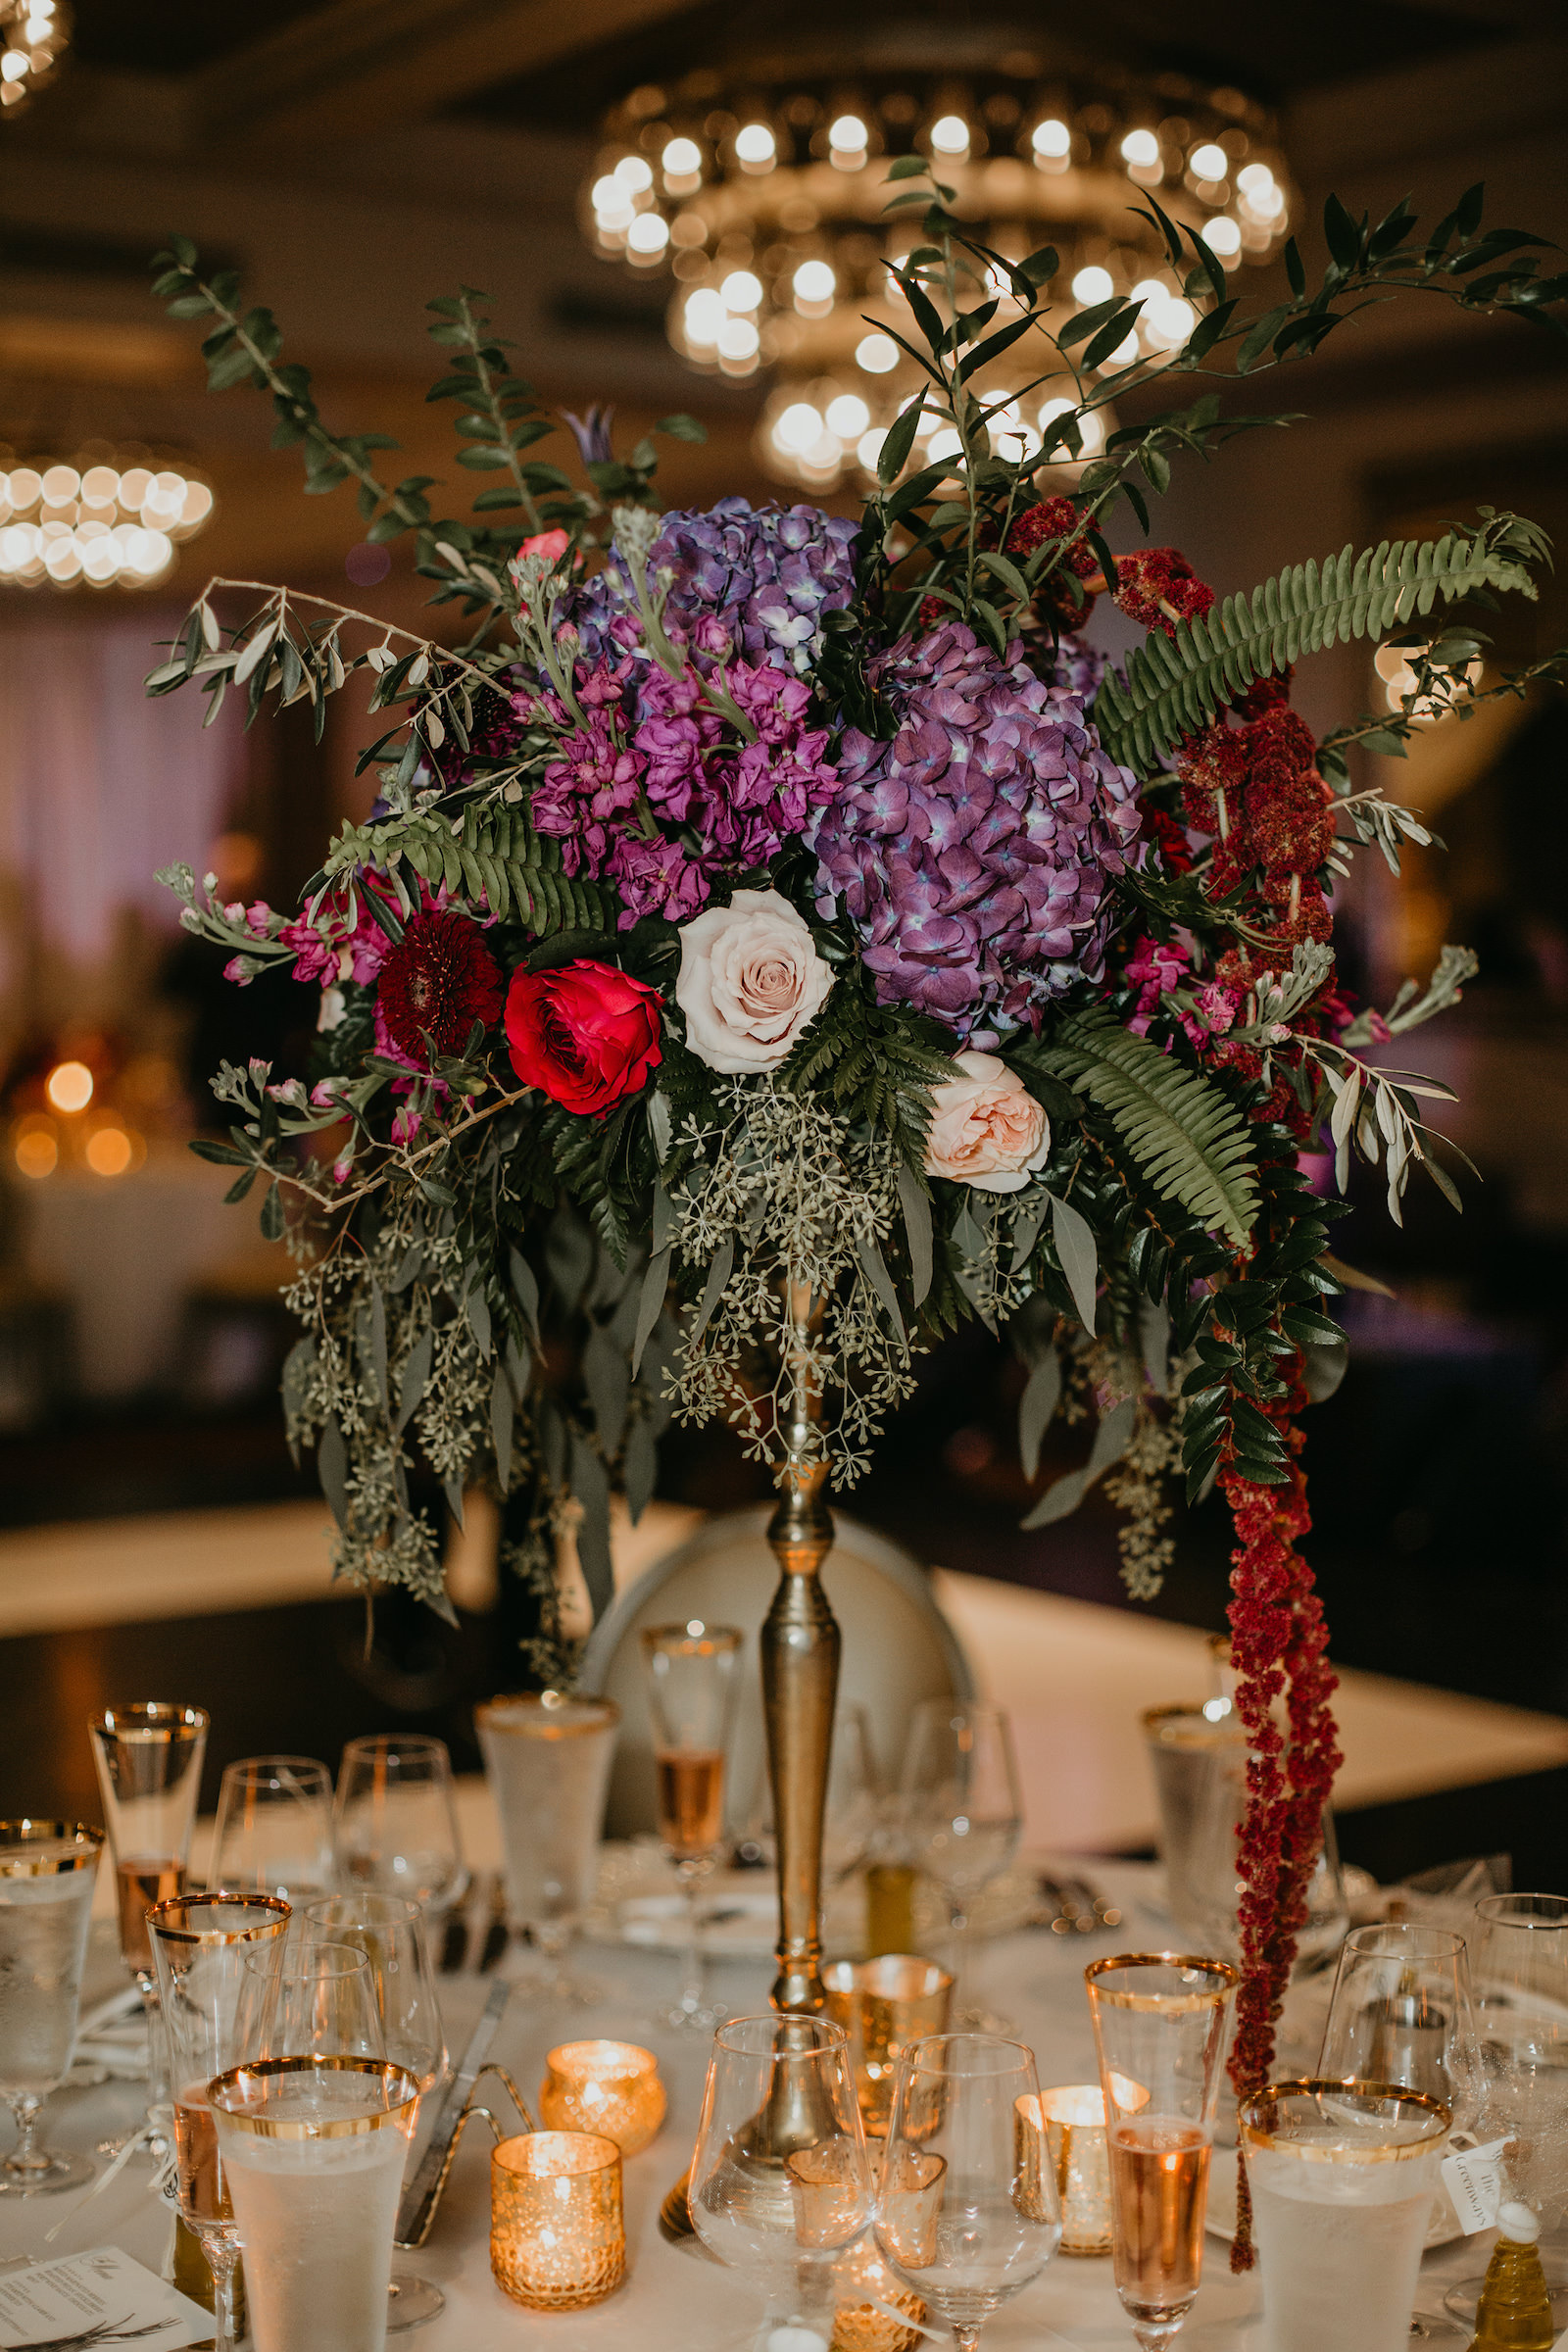 Wedding Centerpiece Inspiration | Tall Candlestick Centerpiece with Loose Cascading Floral Arrangement of Purple Hydrangea, Deep Red Burgundy Roses and Amaranthus, Olive Branches and Eucalyptus Greenery